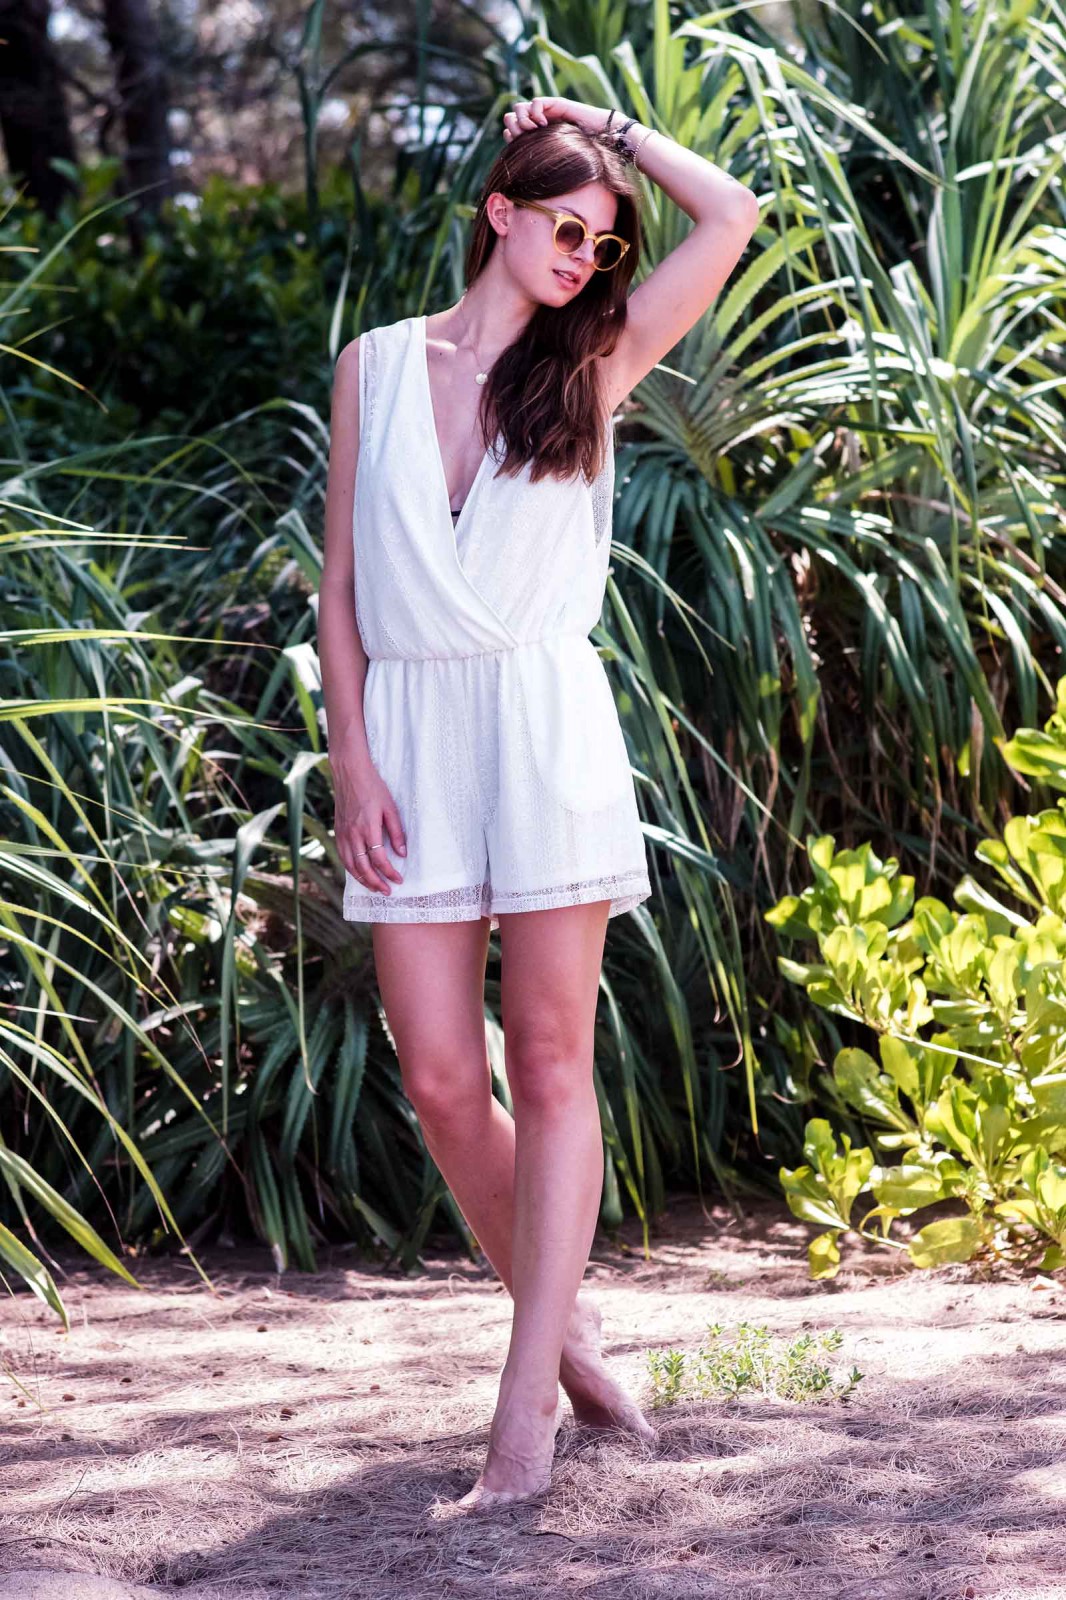 White Playsuit